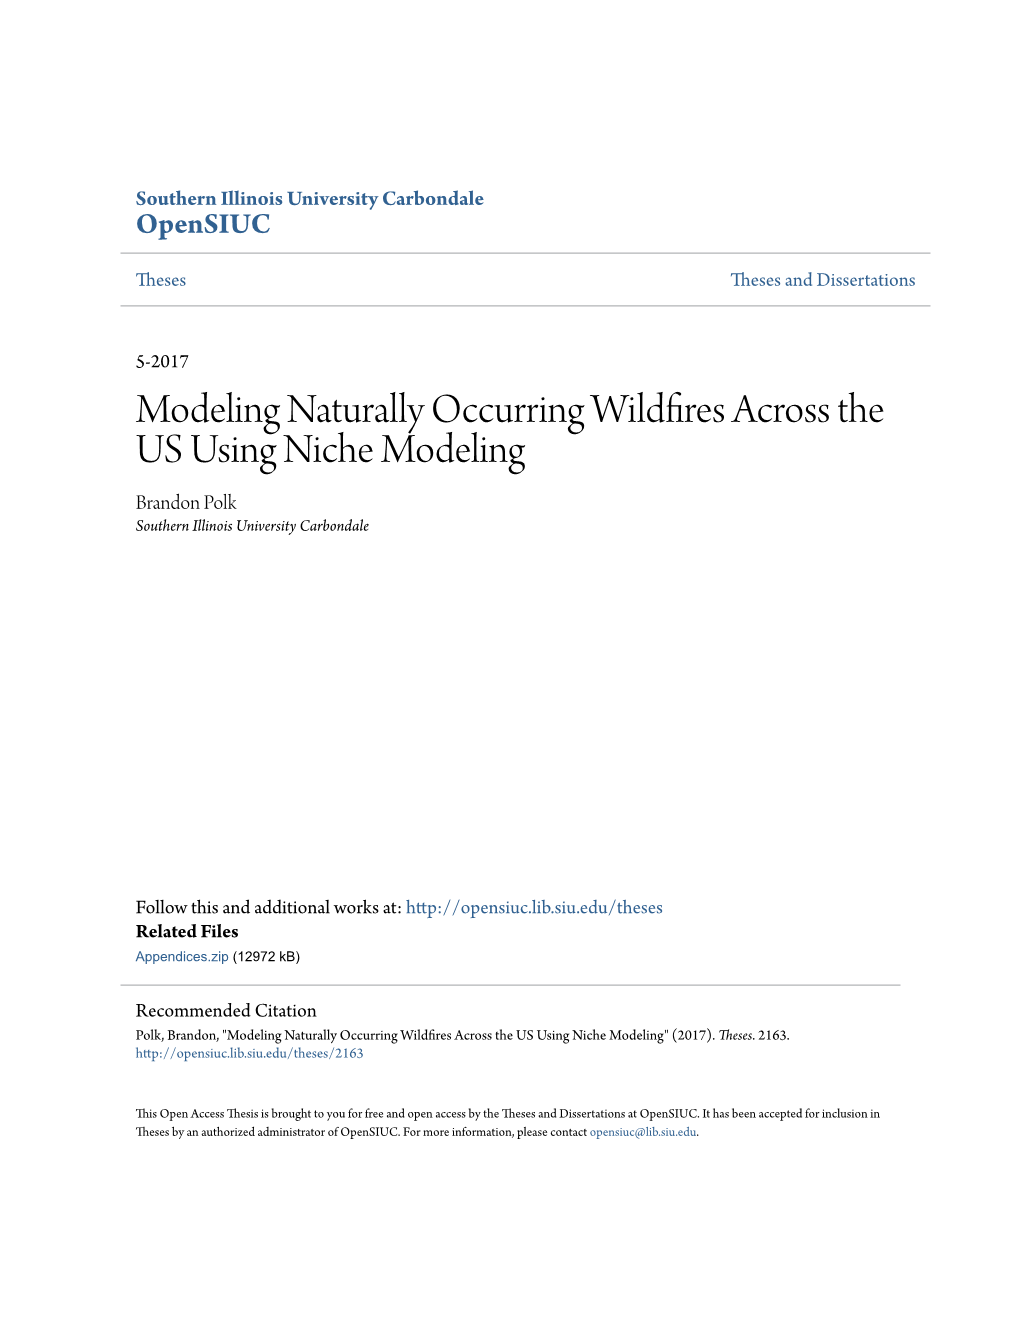 Modeling Naturally Occurring Wildfires Across the US Using Niche Modeling Brandon Polk Southern Illinois University Carbondale